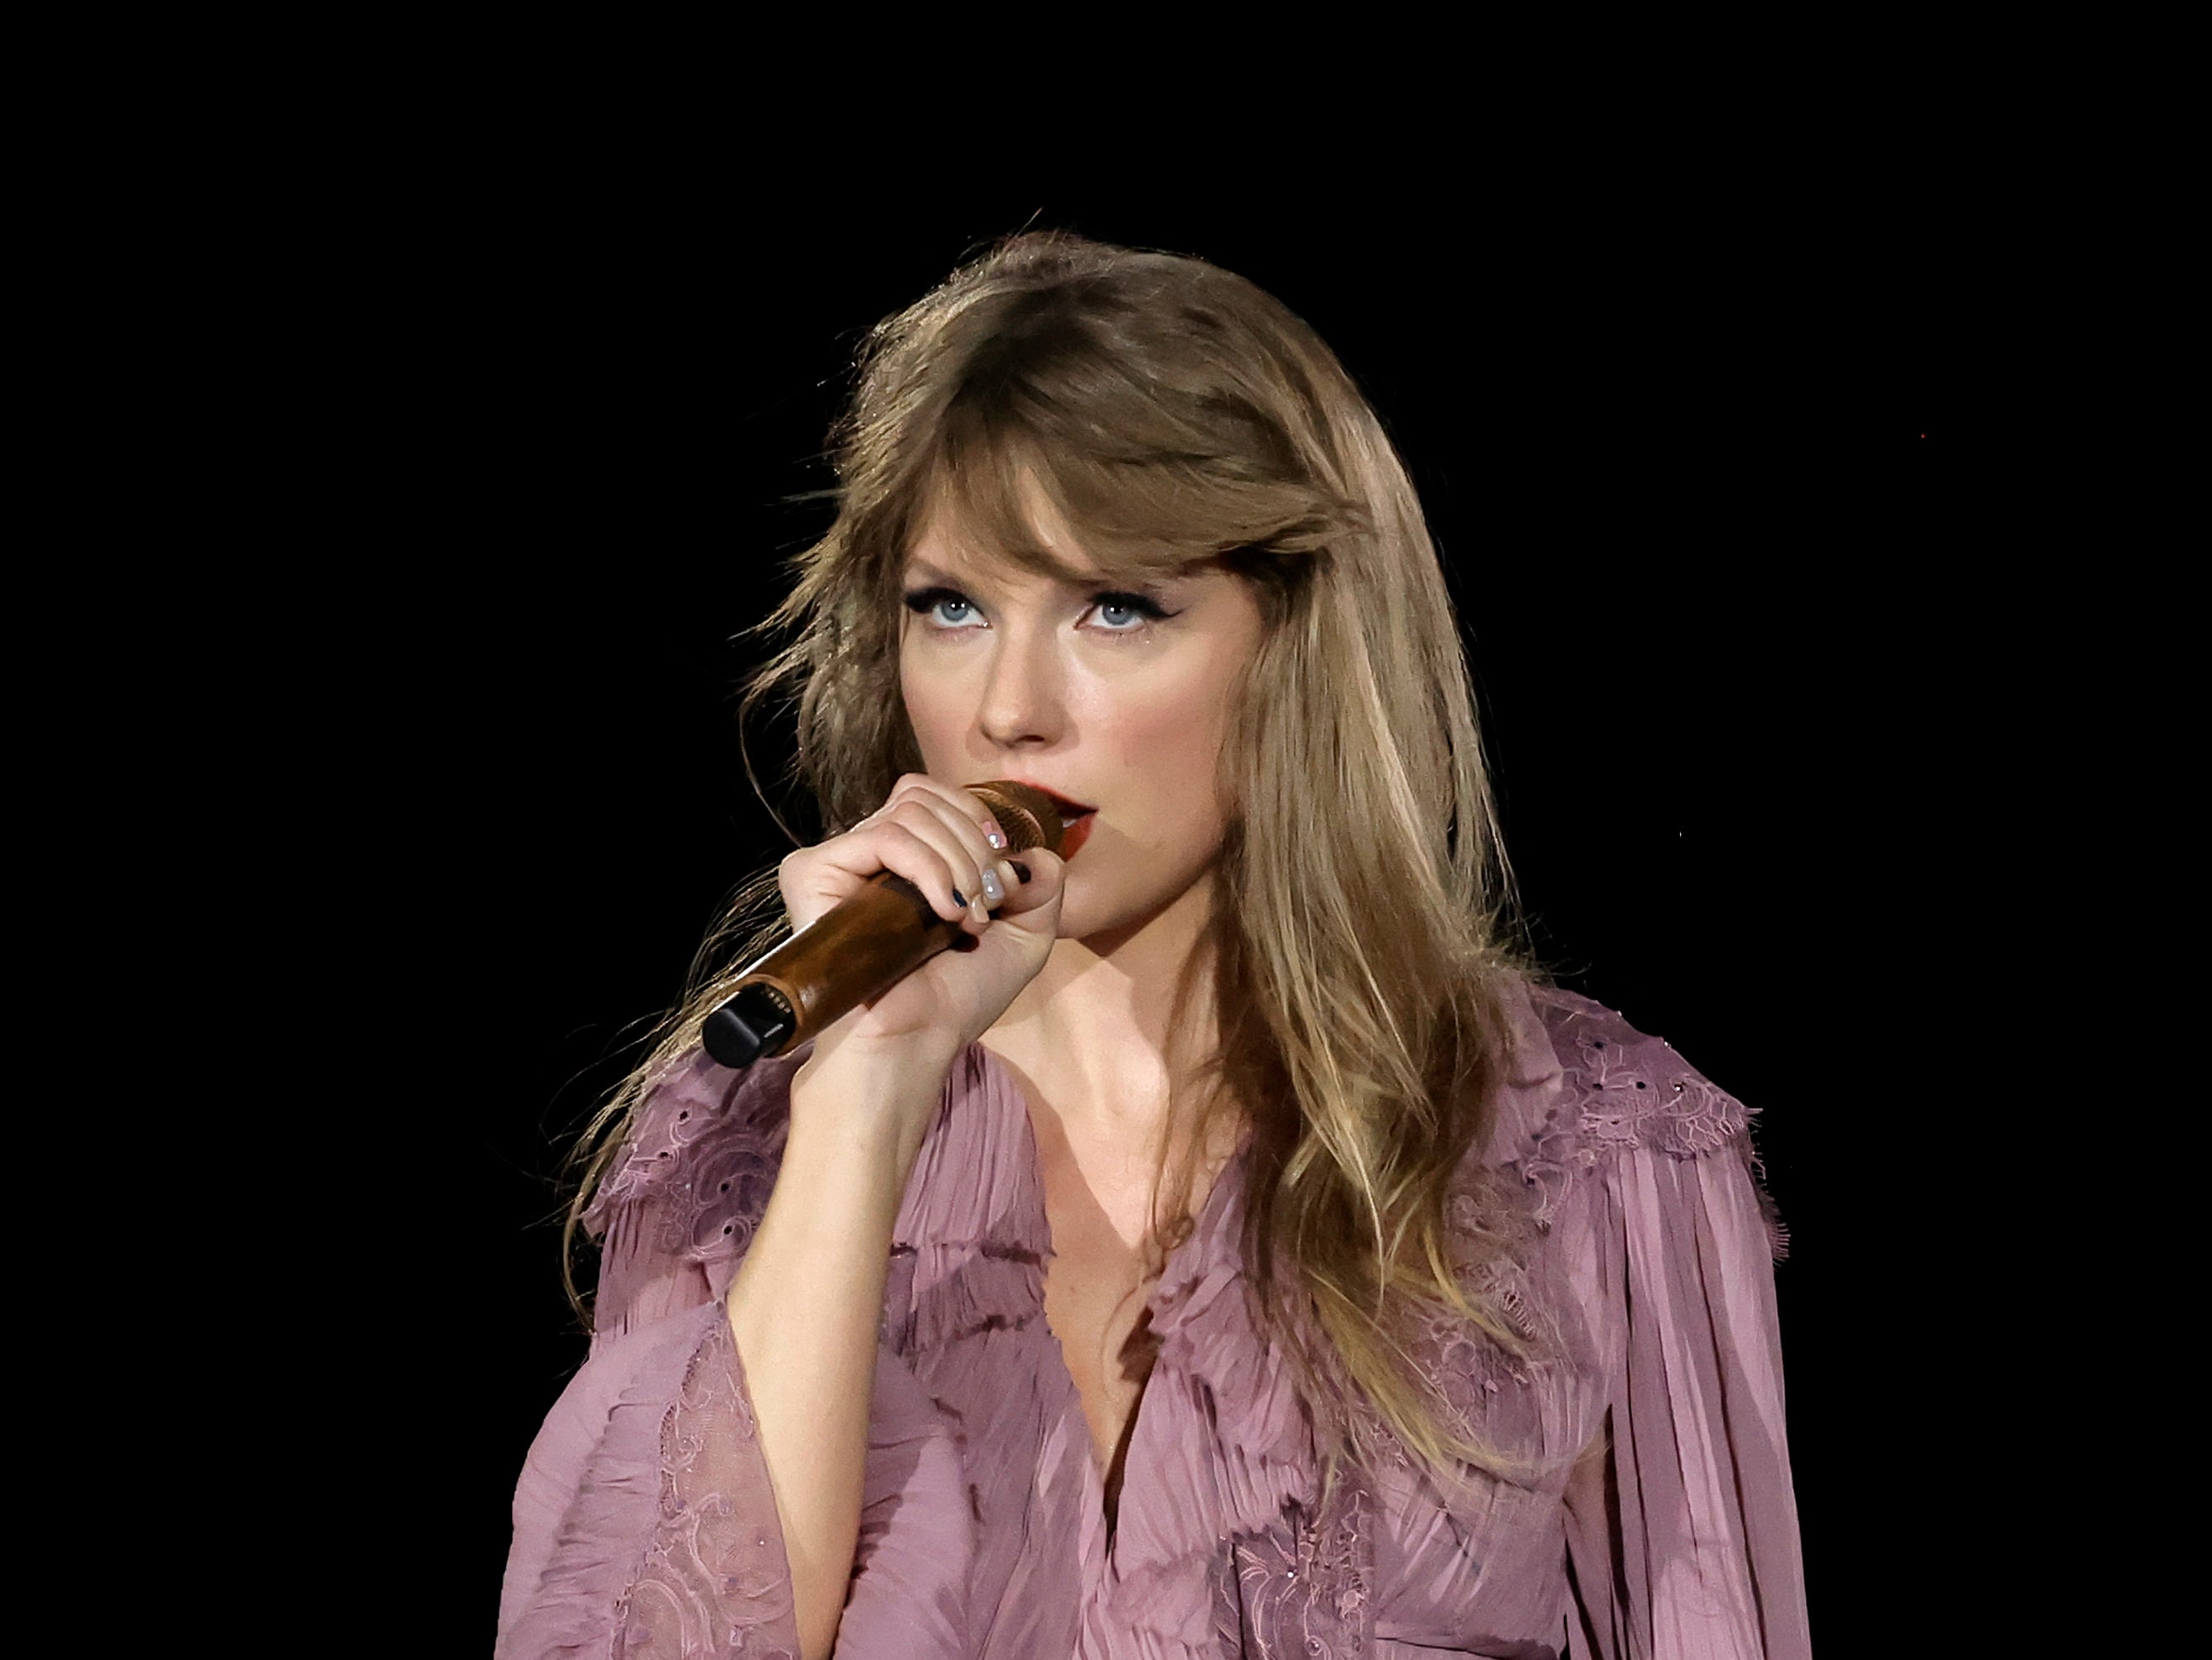 Taylor Swift Eras Tour dates for US and Canada – How to get tickets